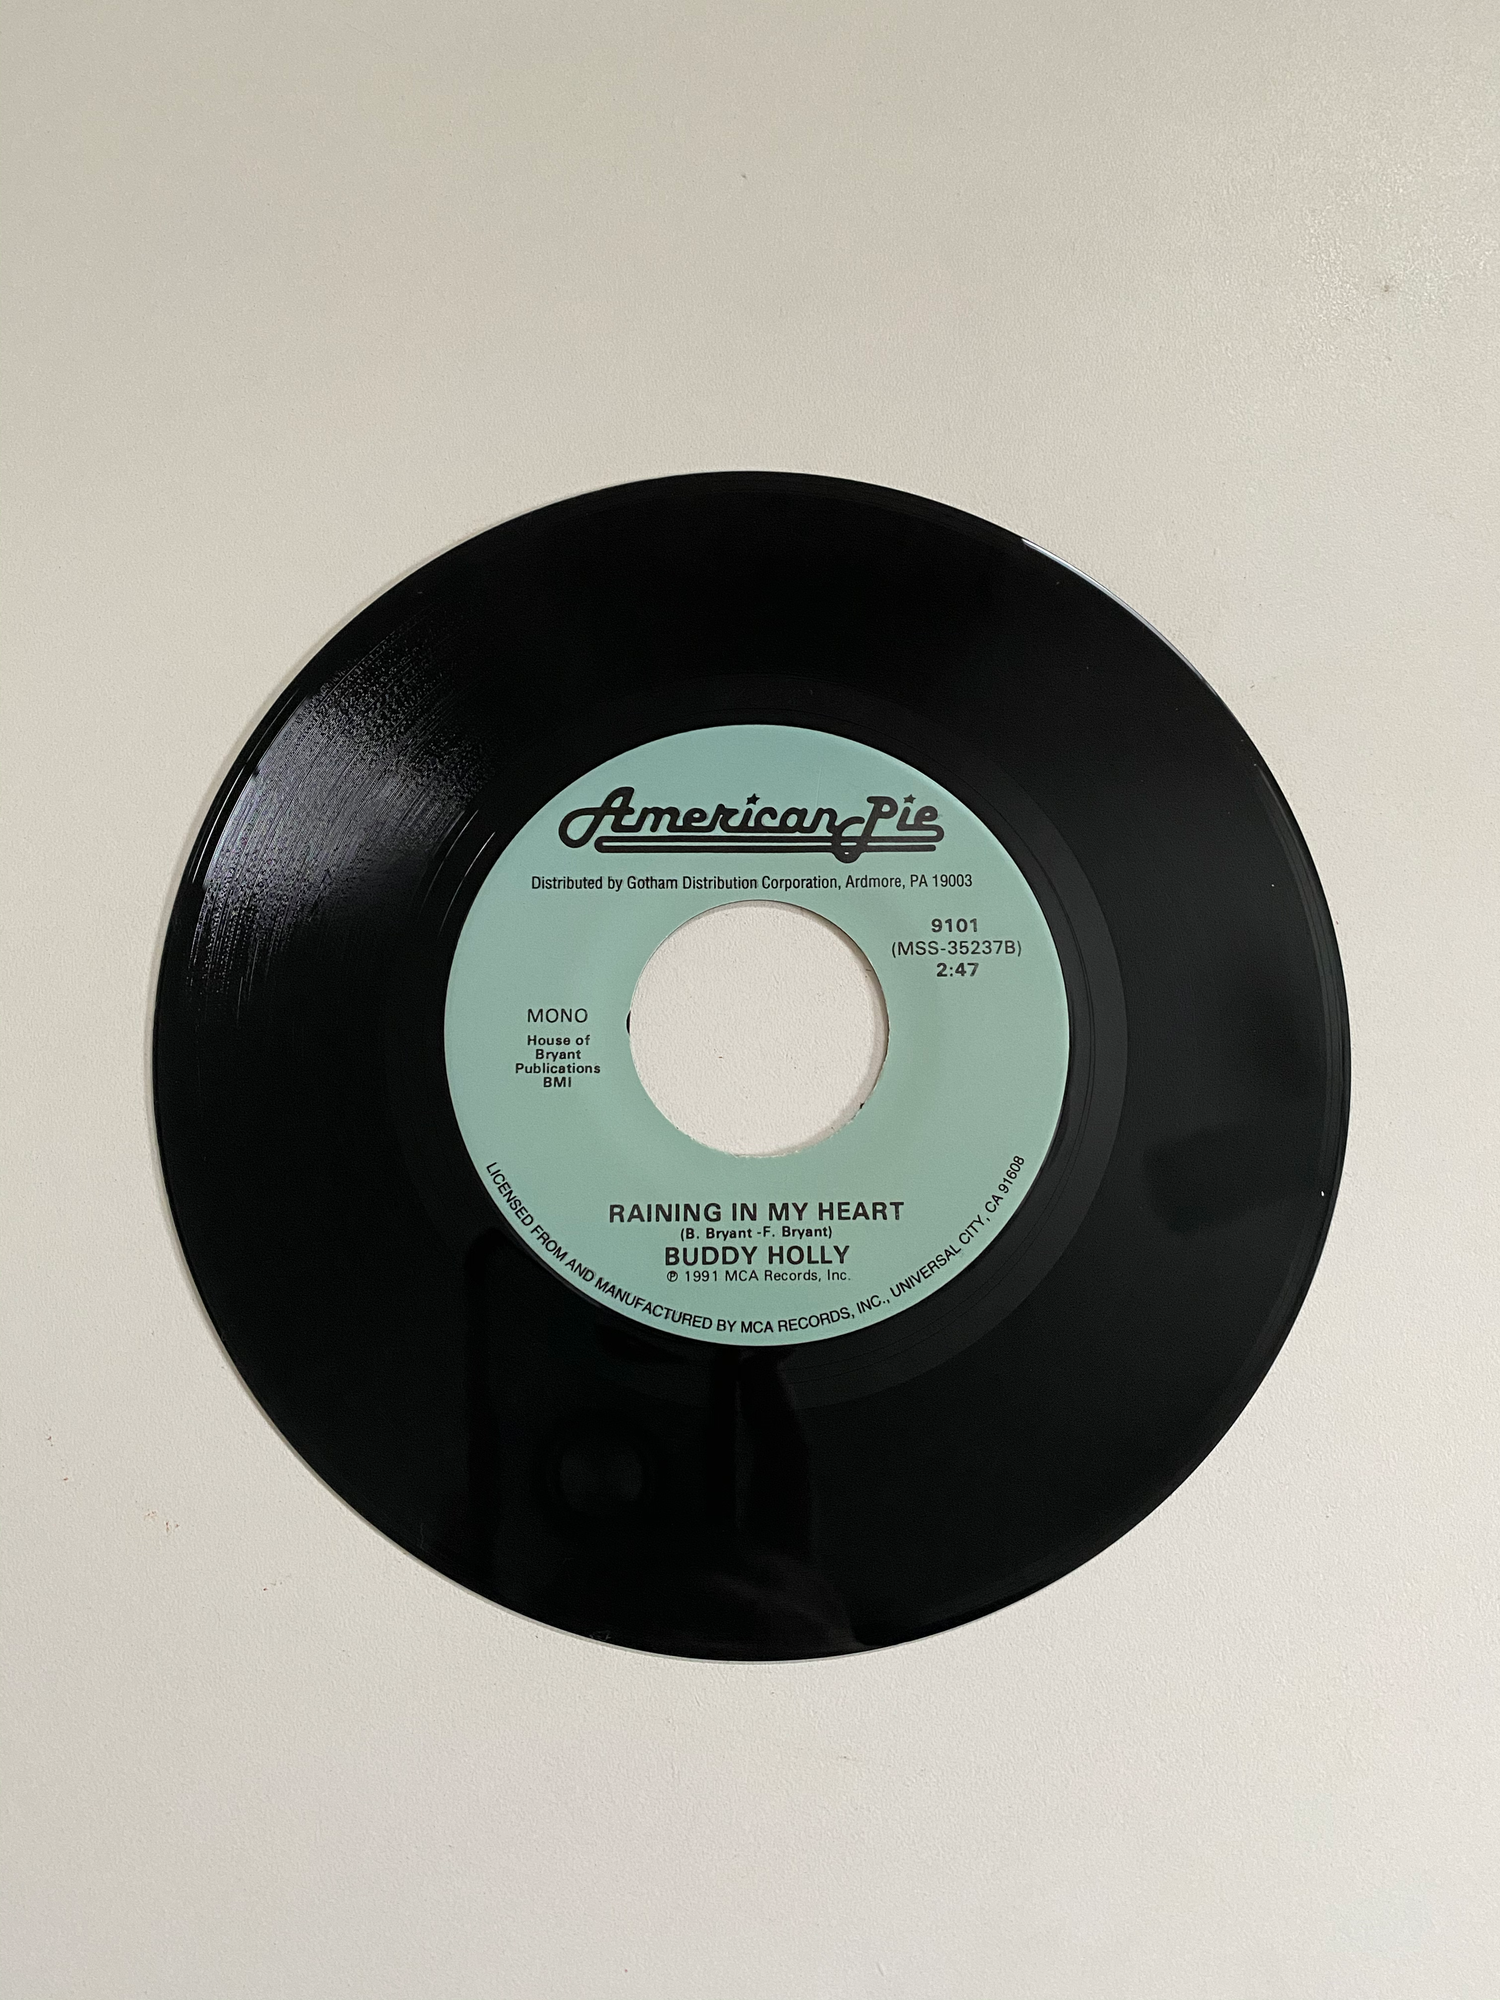 Buddy Holly - Rave On | 45 The Vintedge Co.